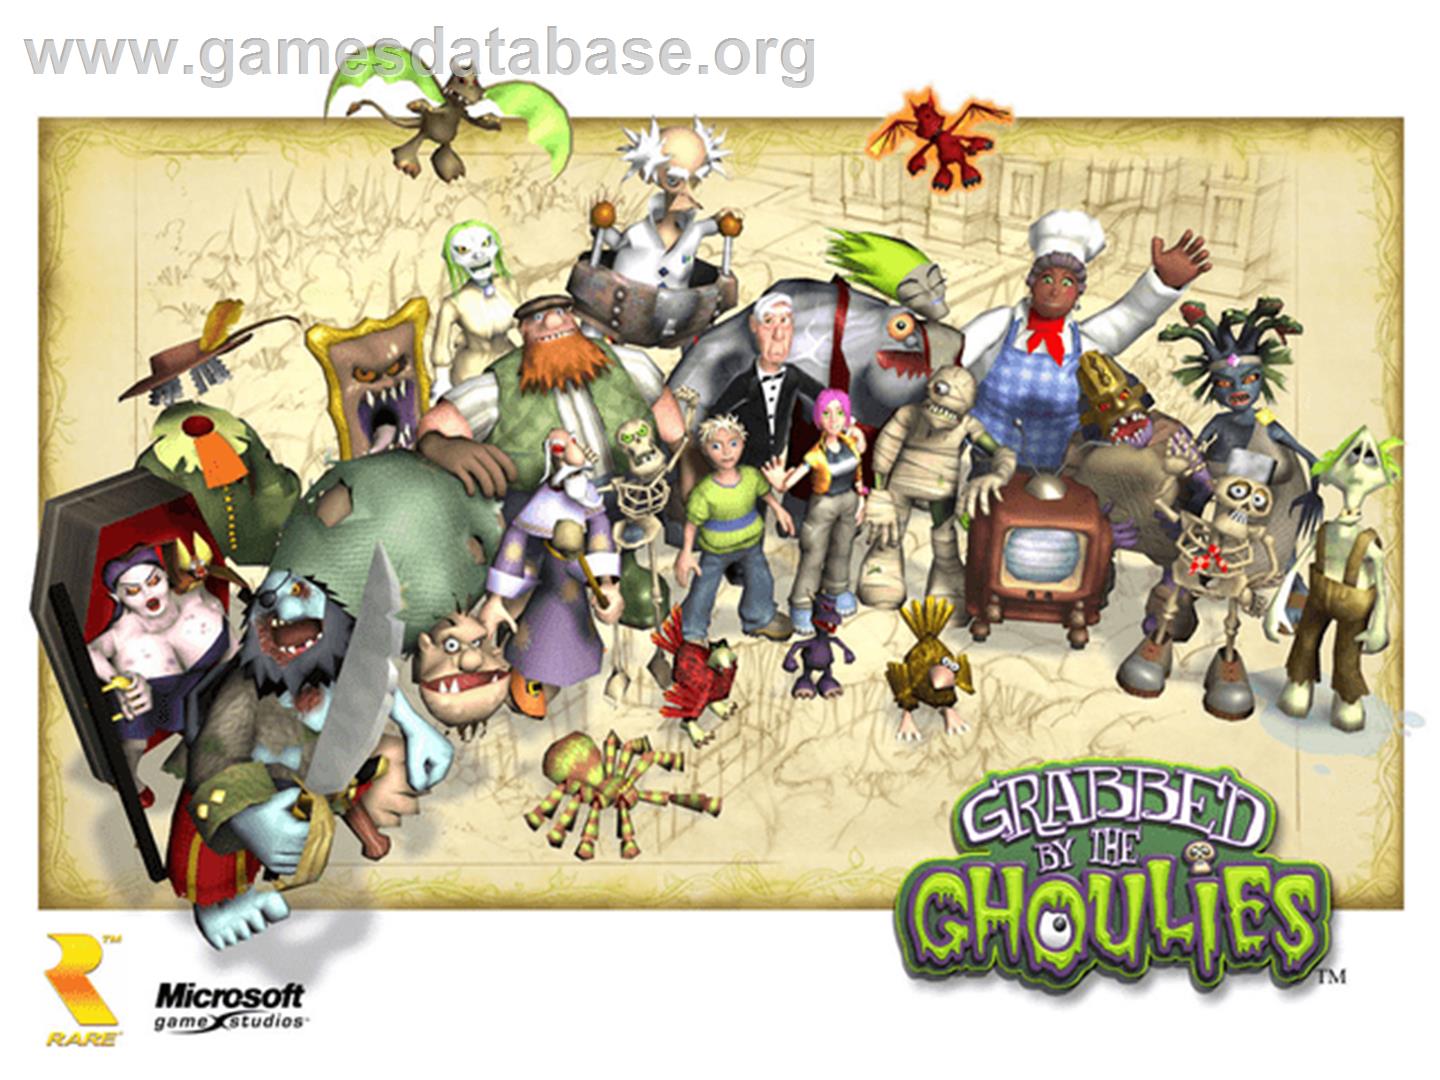 Grabbed by the Ghoulies - Microsoft Xbox - Artwork - Title Screen